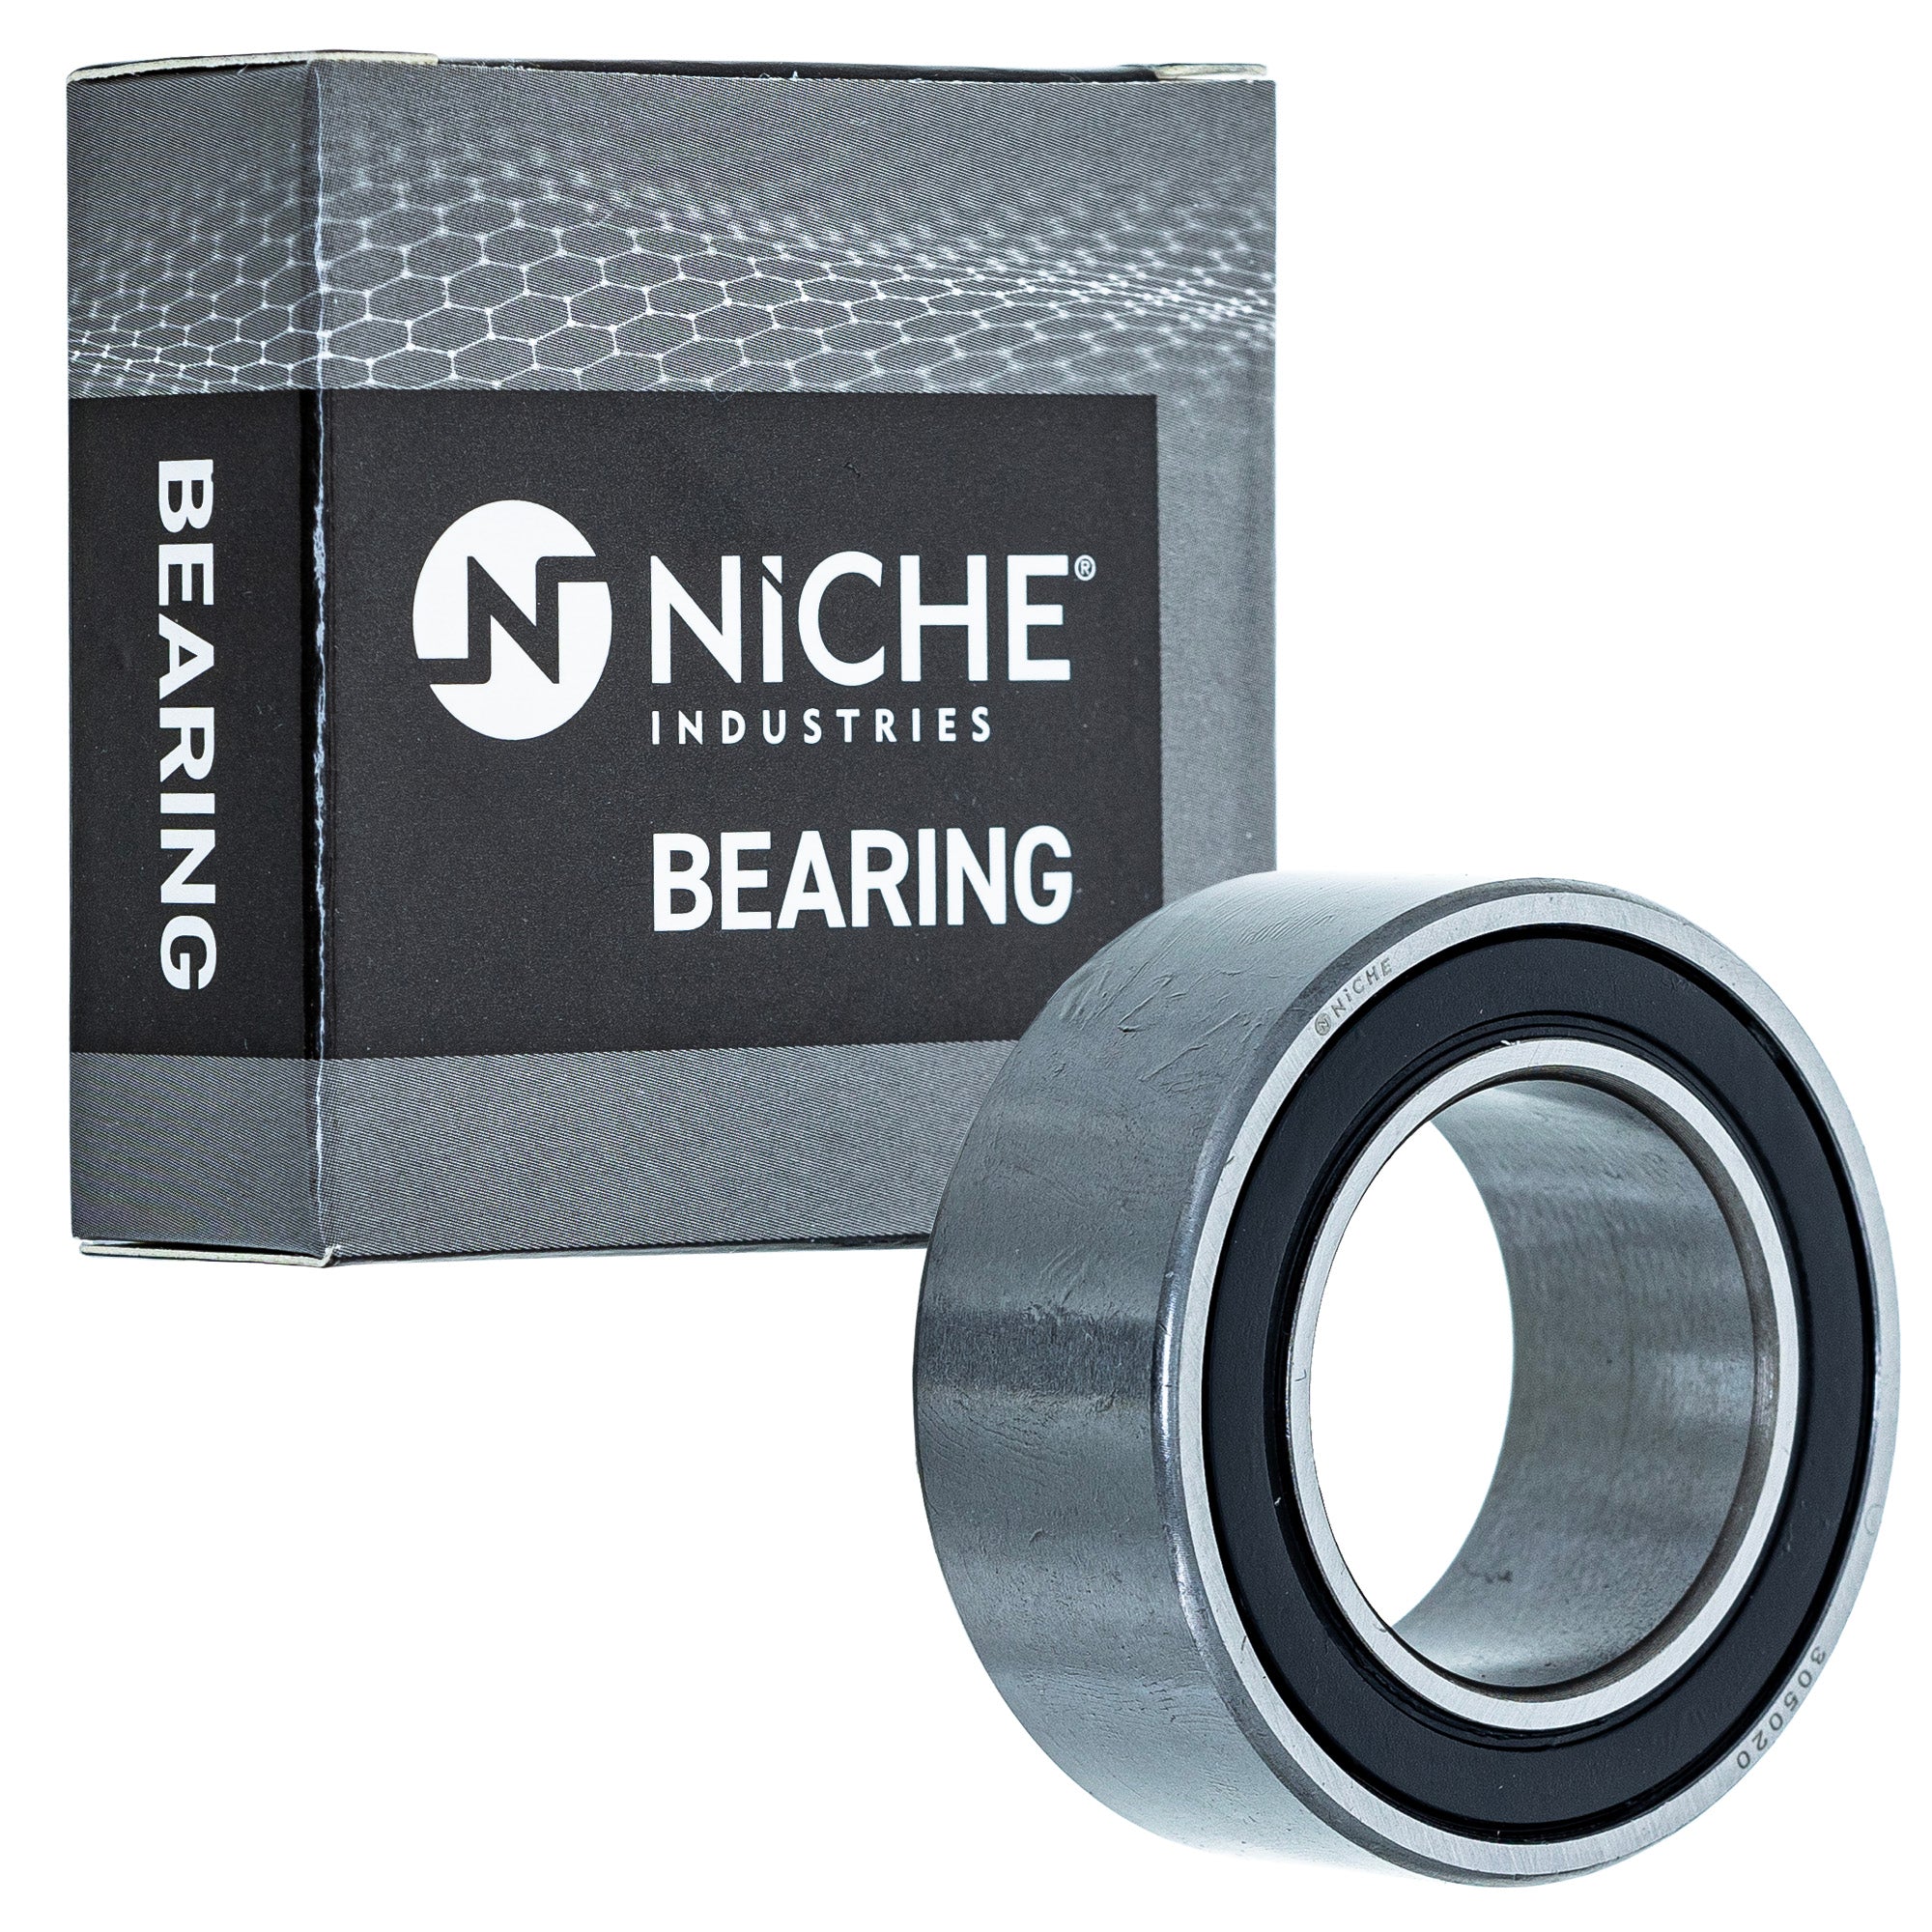 NICHE 519-CBB2241R Bearing for zOTHER Arctic Cat Textron FourTrax Cat